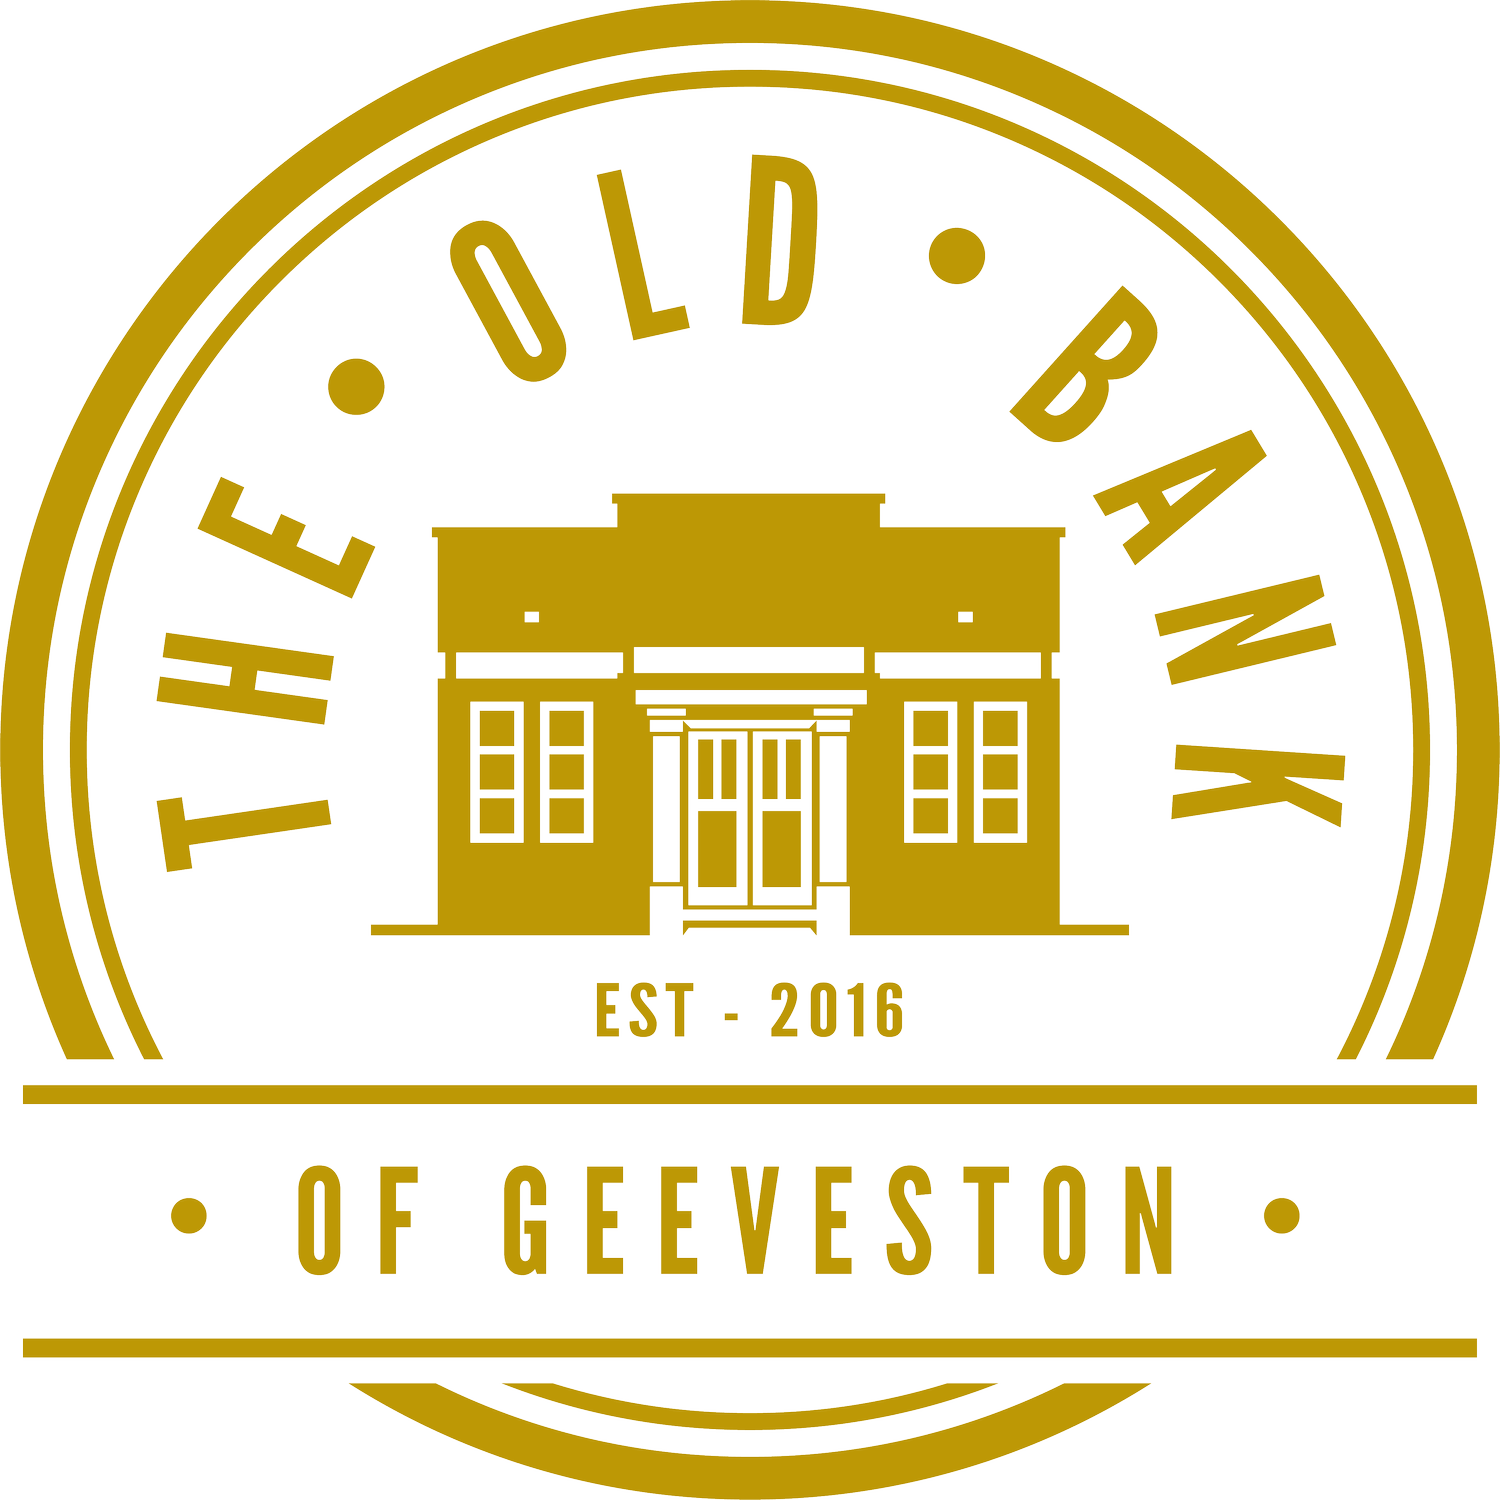 The Old Bank of Geeveston